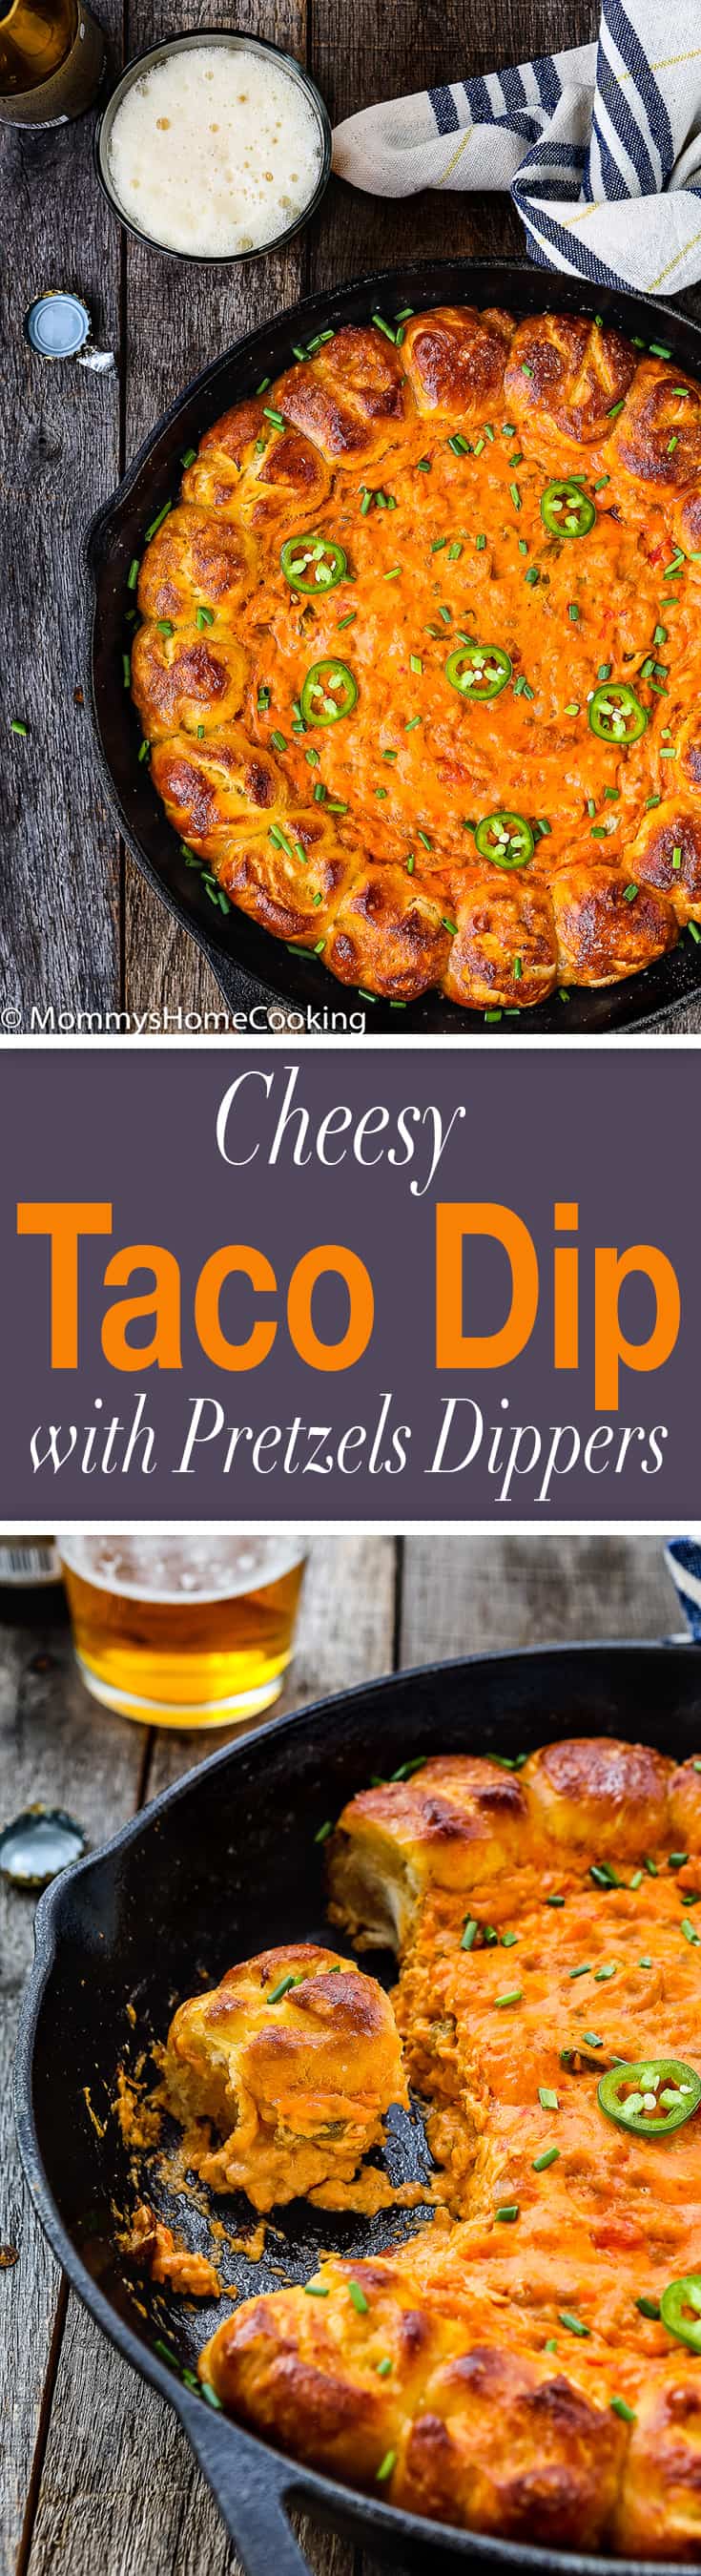 Cheesy Taco Dip with Garlic Pretzels Dippers | Mommy's Home Cooking